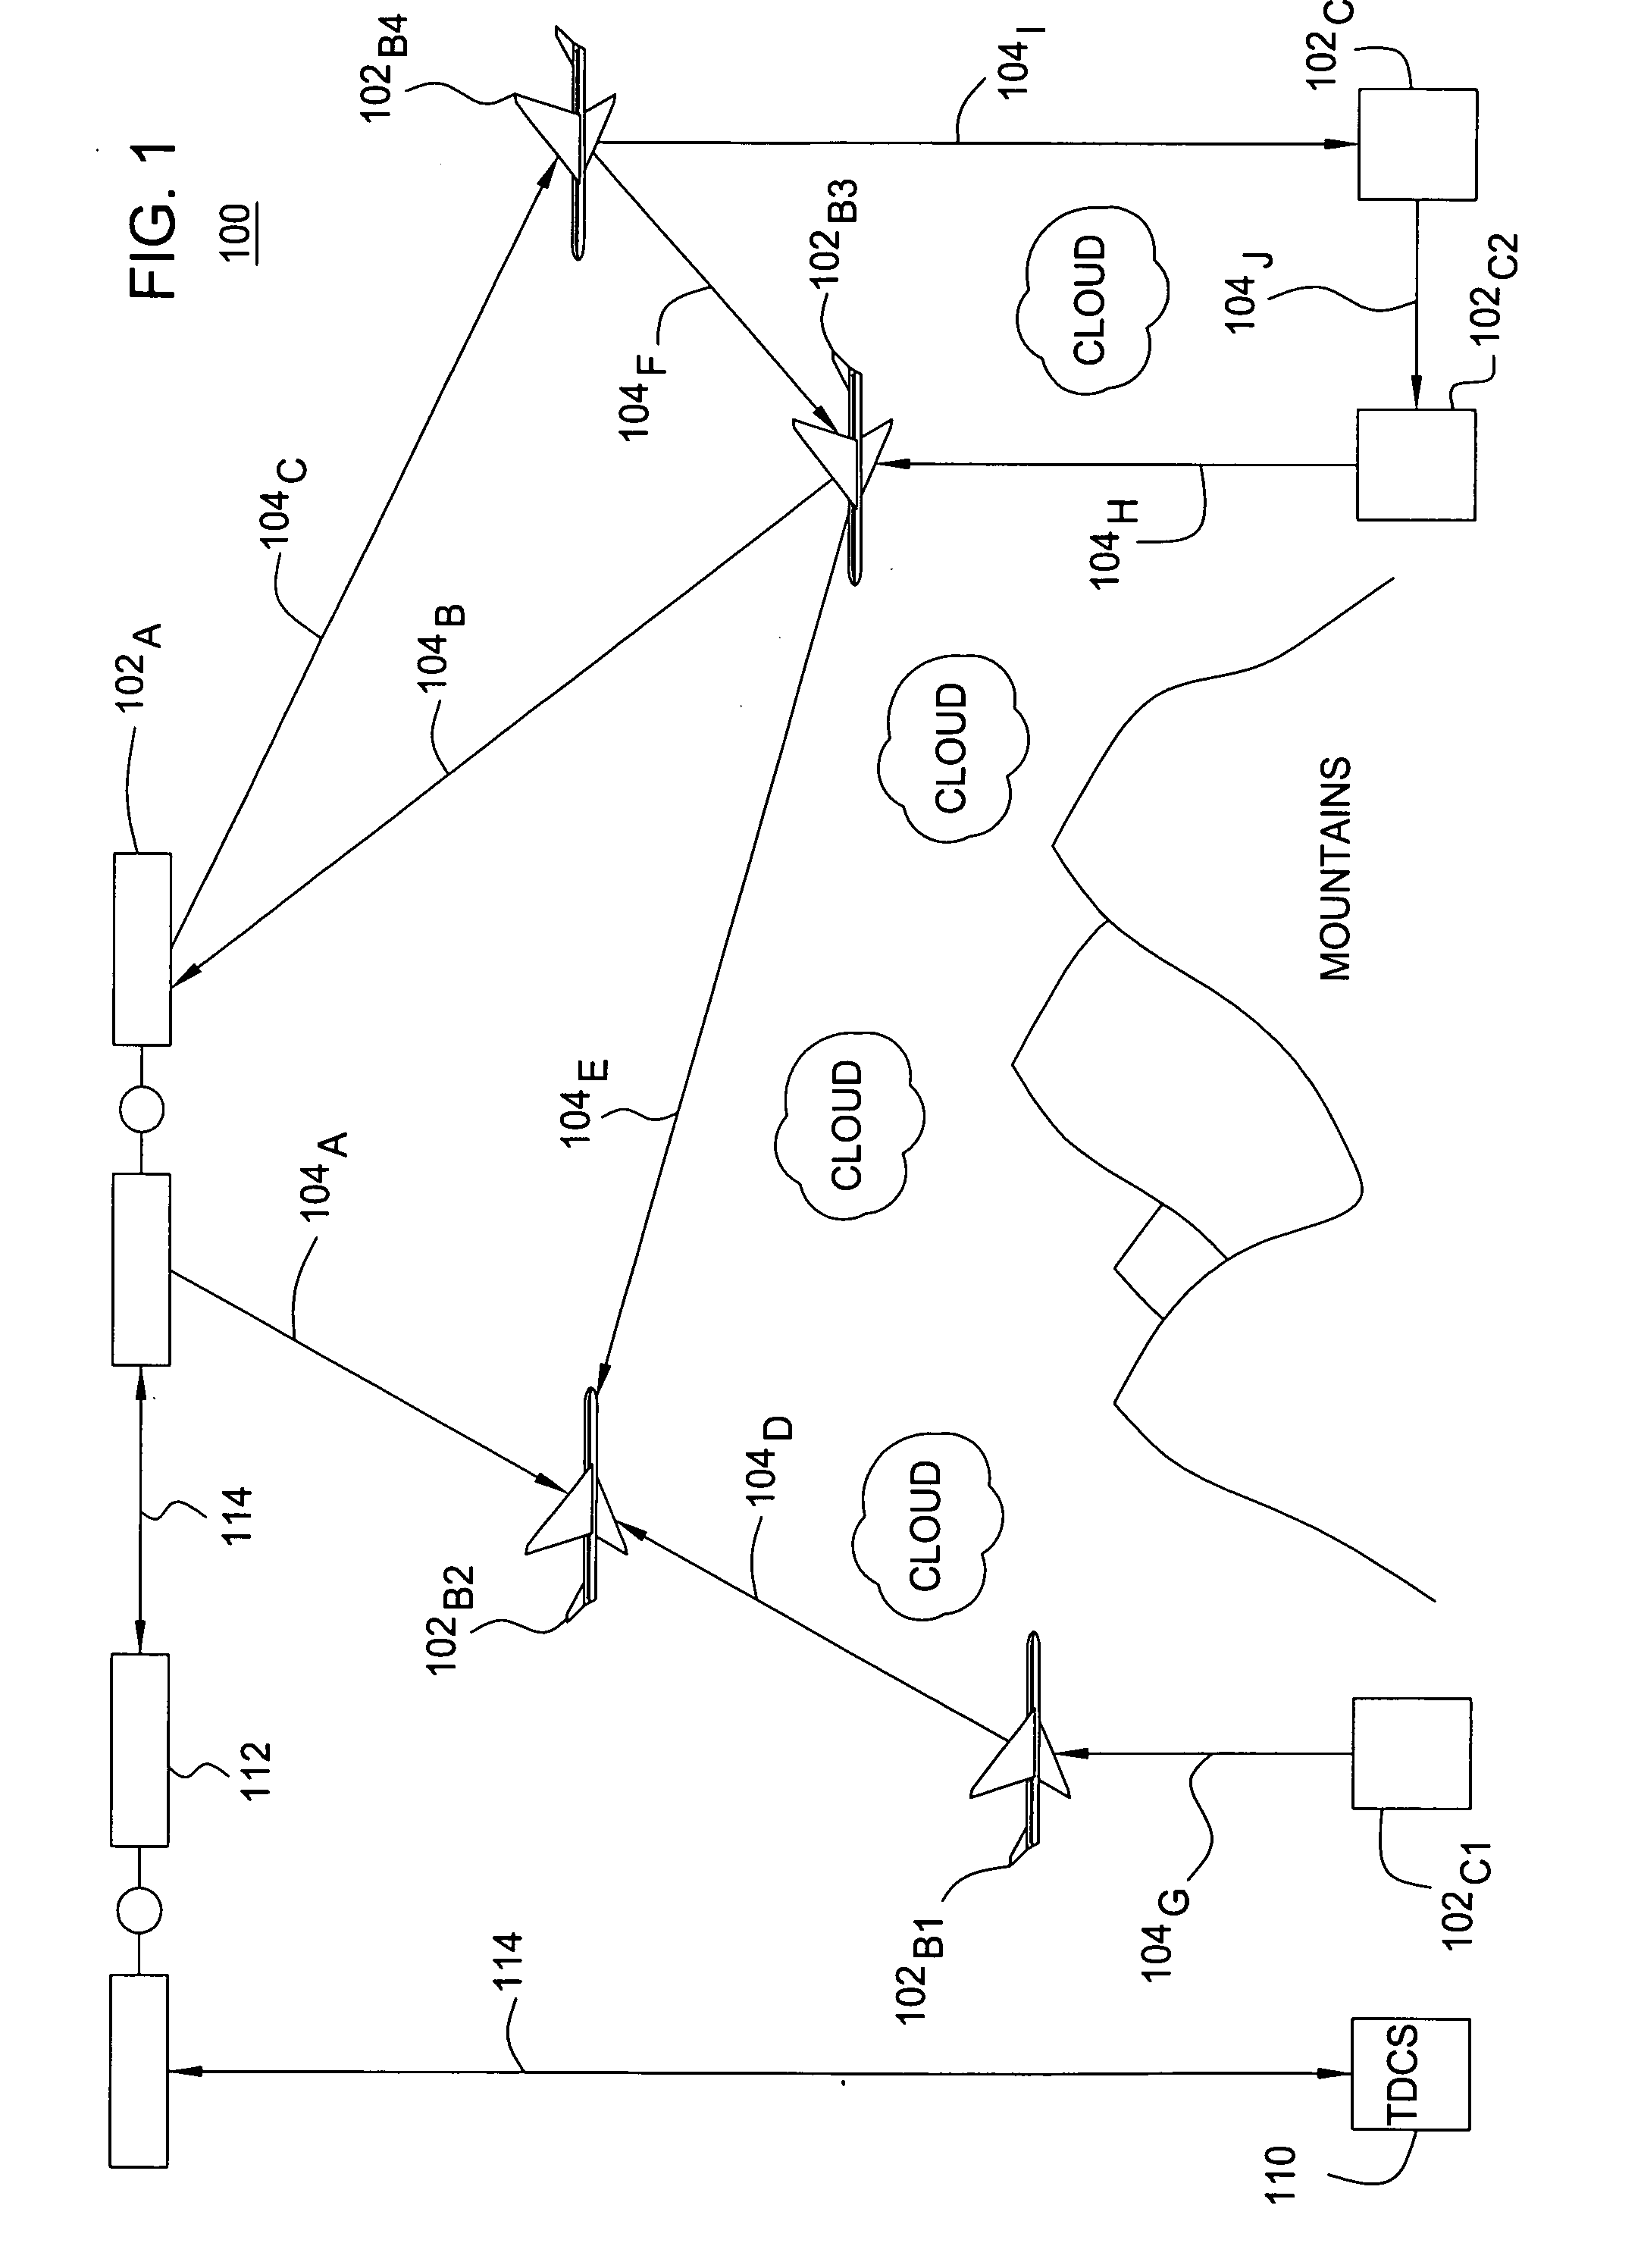 Method and apparatus for identifying network connectivity changes in dynamic networks